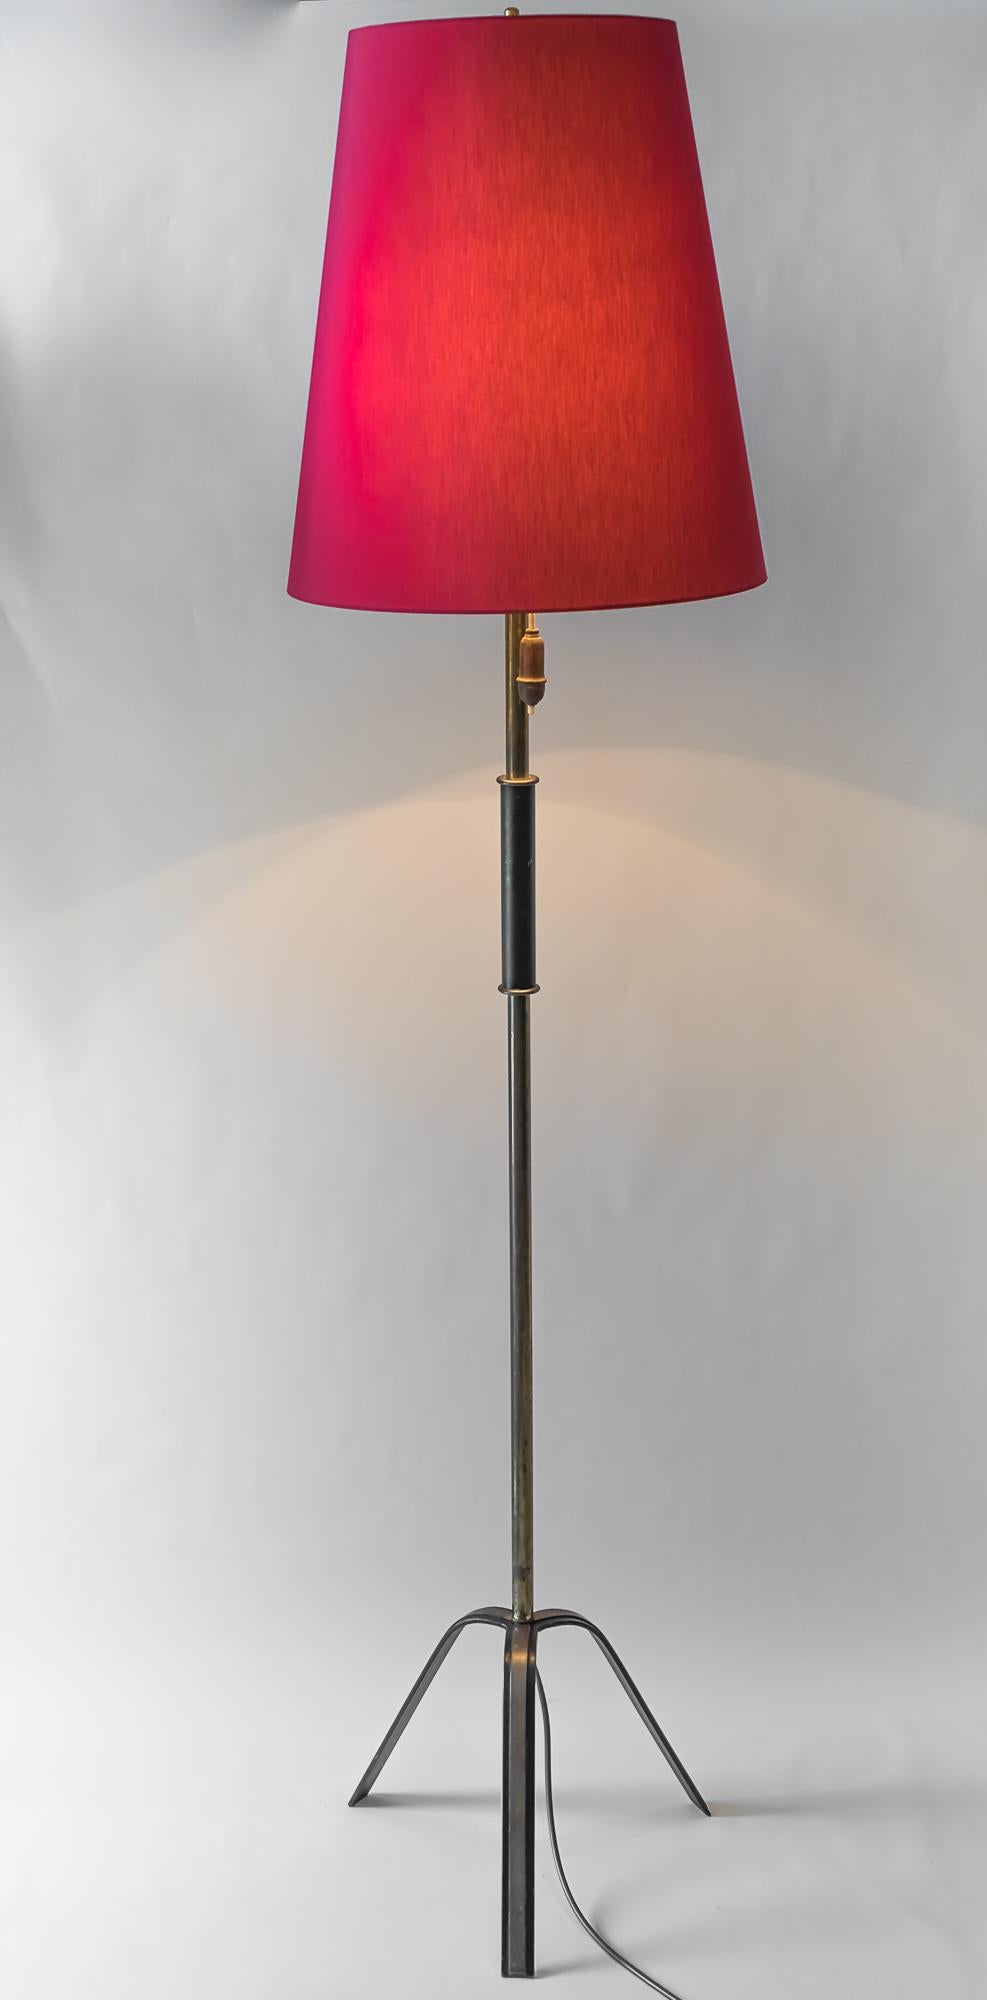 Vintage floor lamp, Vienna, circa 1950s
Original condition
The shade is replaced (New)
The lampshades have been renewed as well based on the original dimensions.